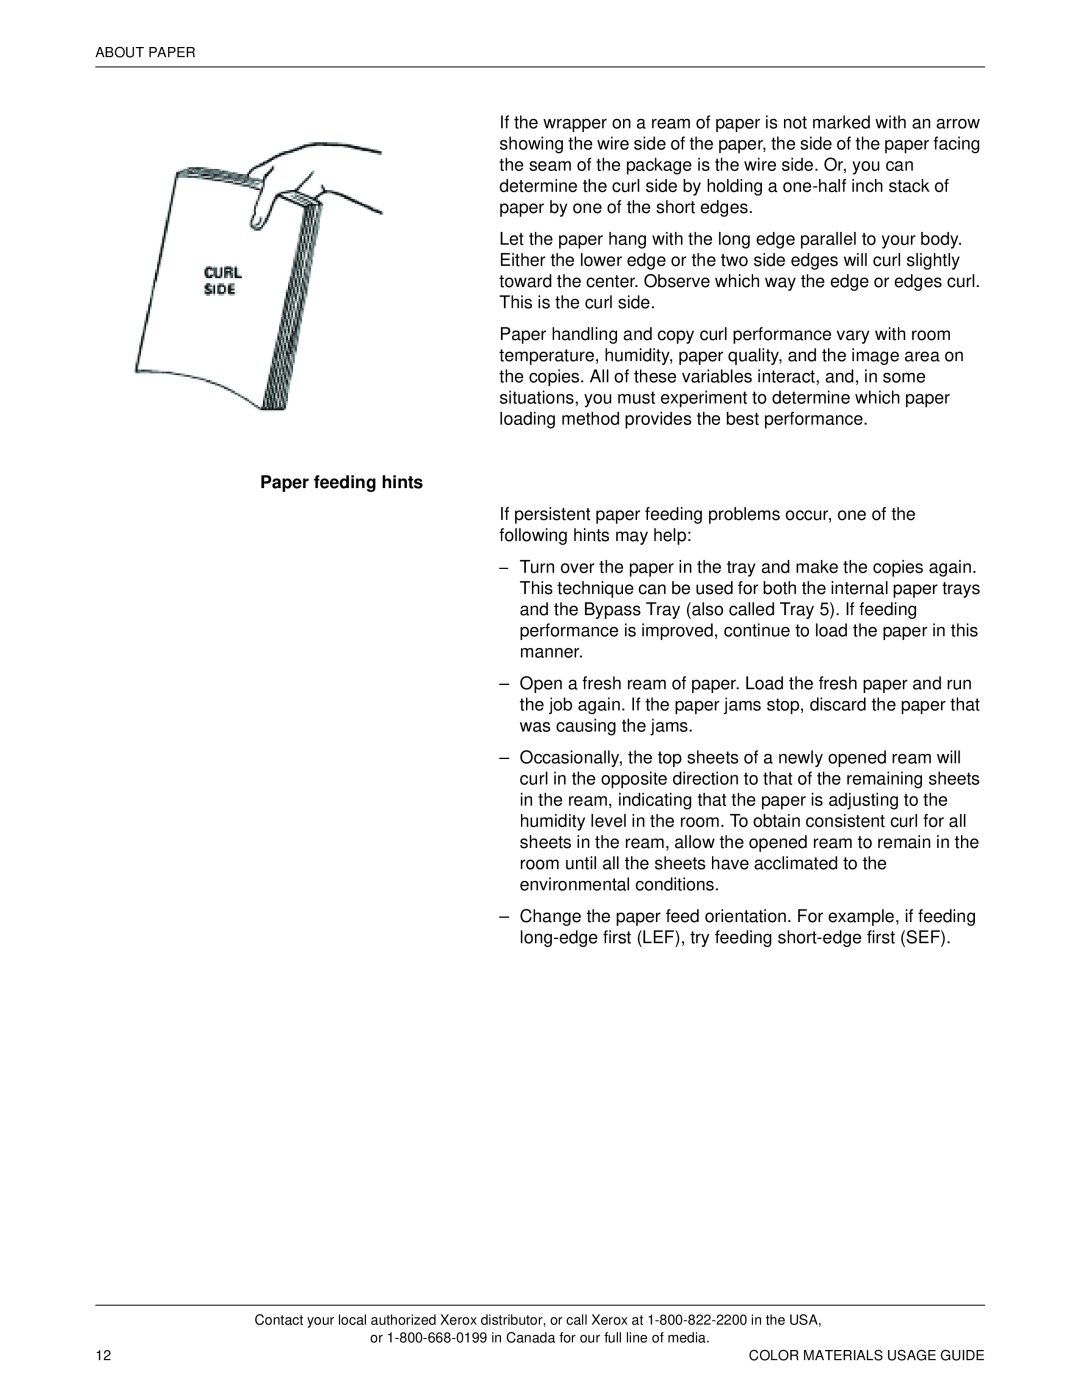 Xerox 12 manual Paper feeding hints, About Paper, Color Materials Usage Guide 